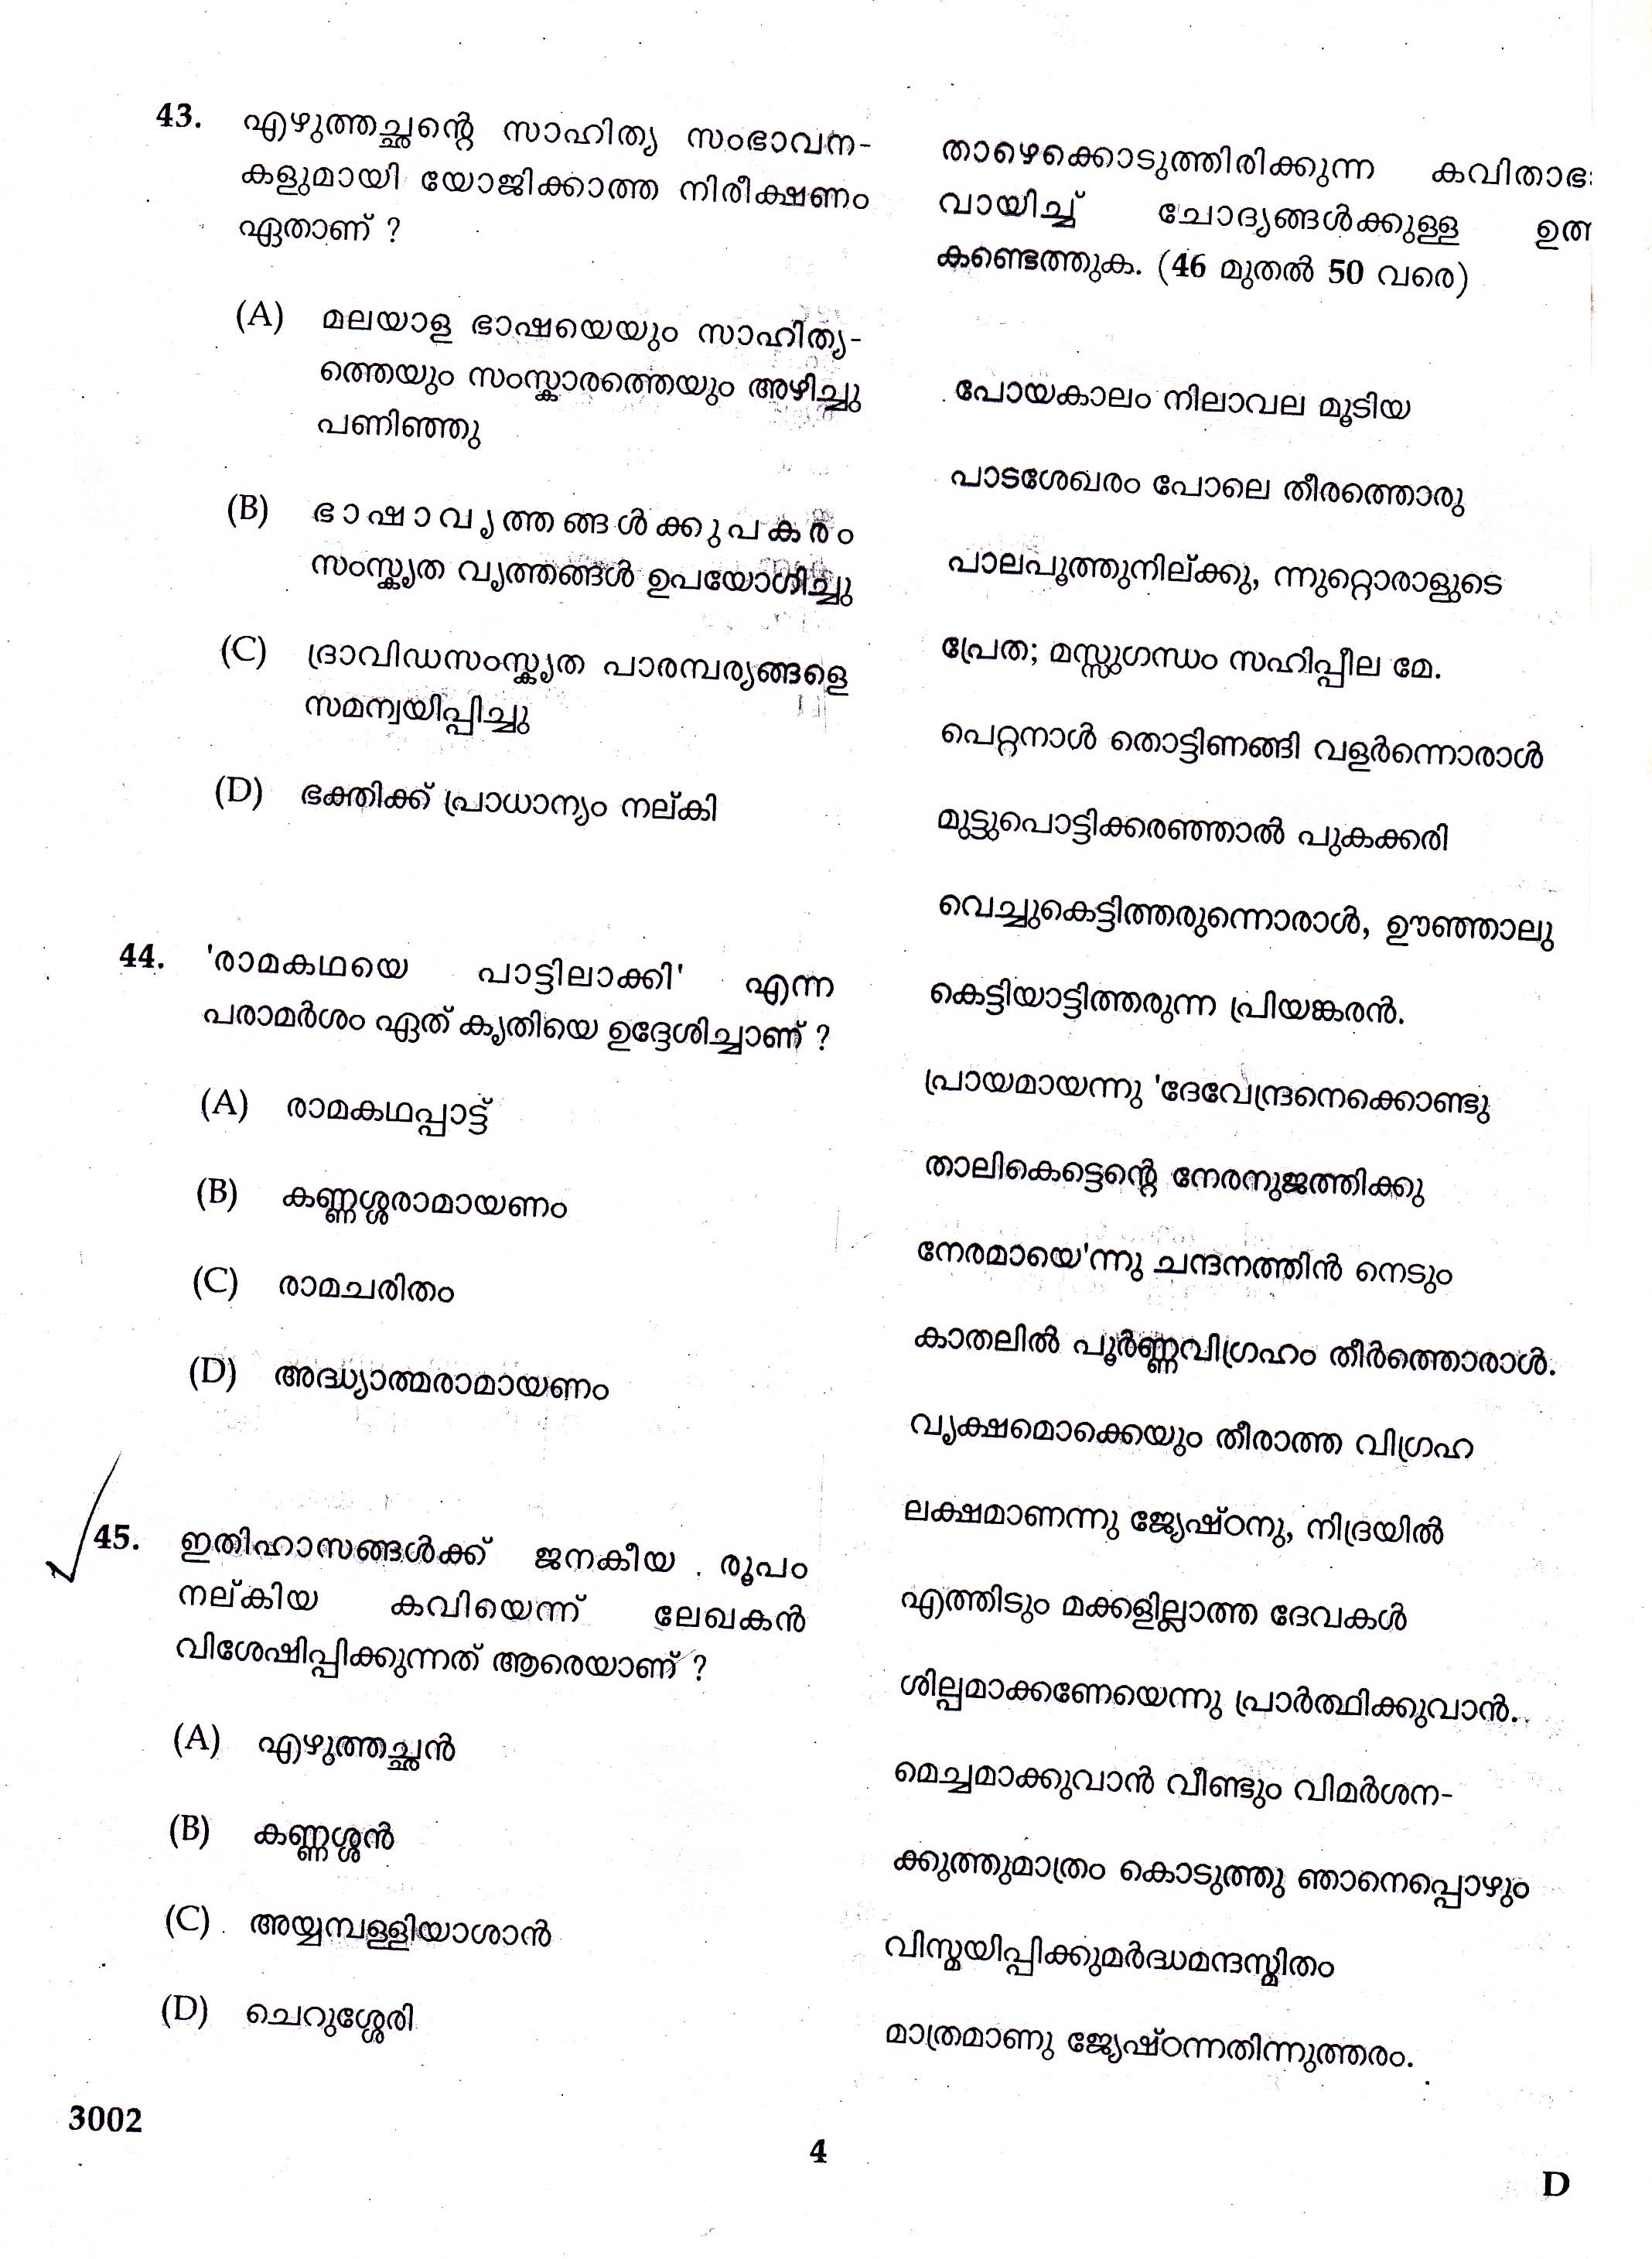 KTET Category III Part 2 Malayalam Question Paper with Answers 2017 2